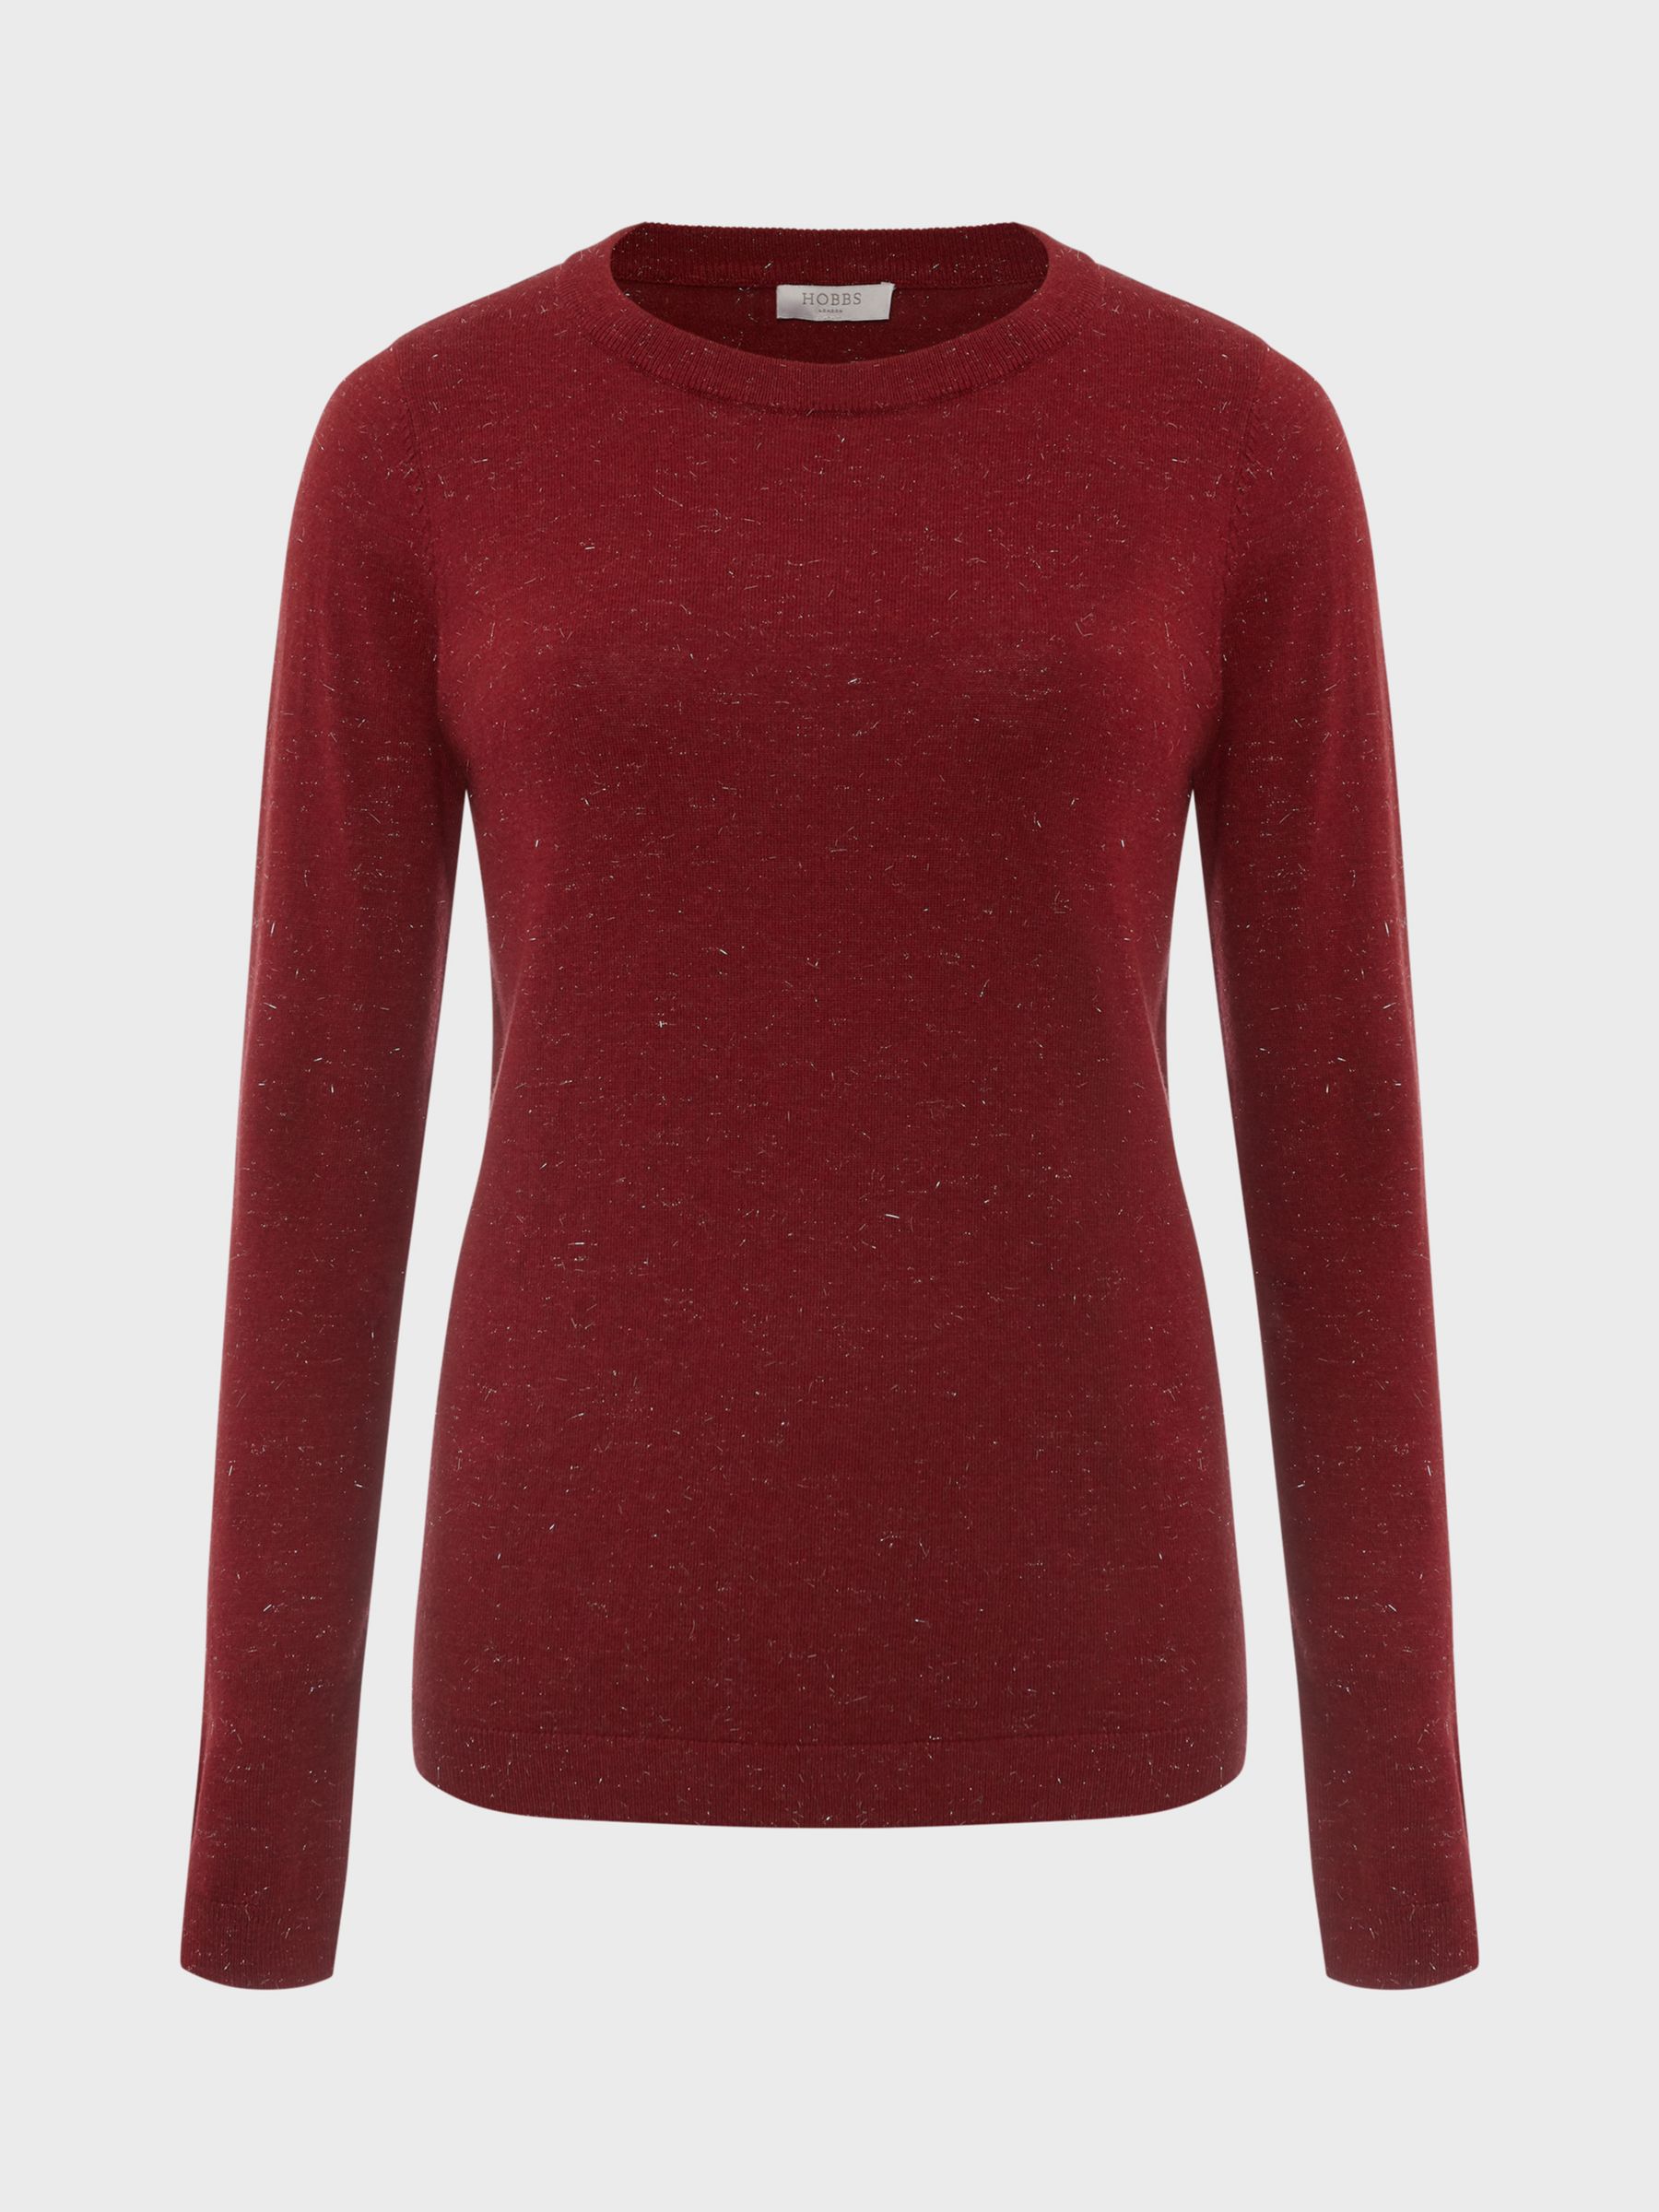 Hobbs Penny Sparkle Jumper, Red, S